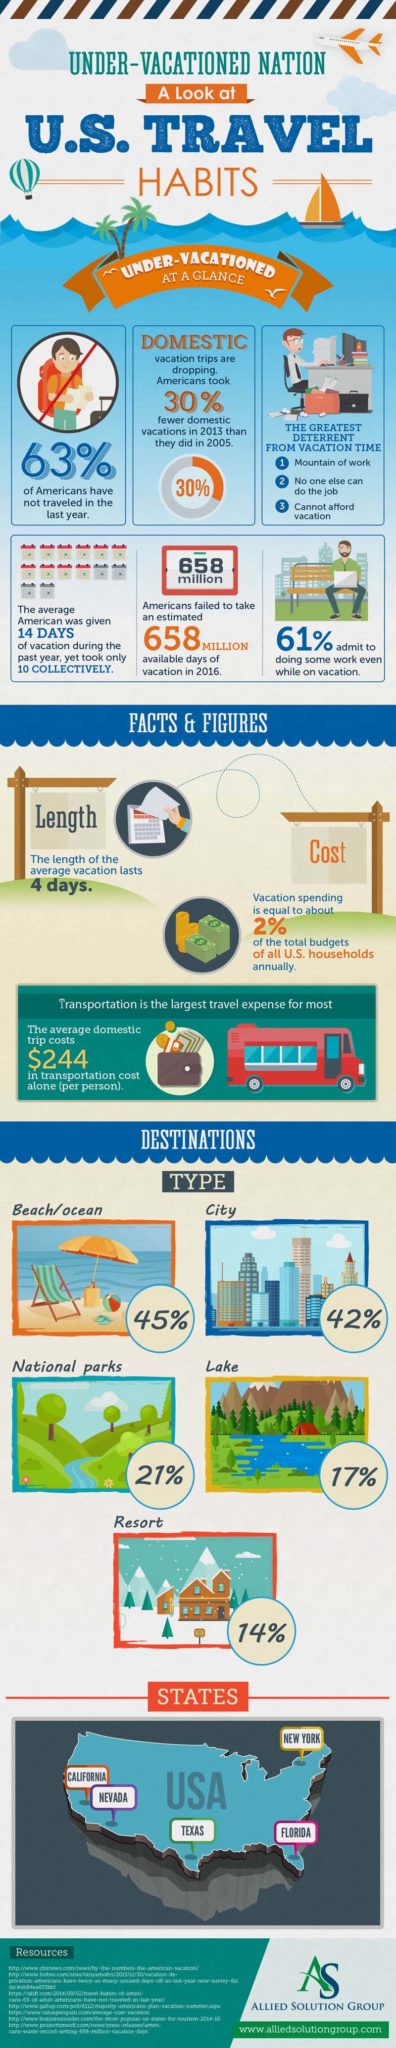 Under Vacationed Nation Infographic